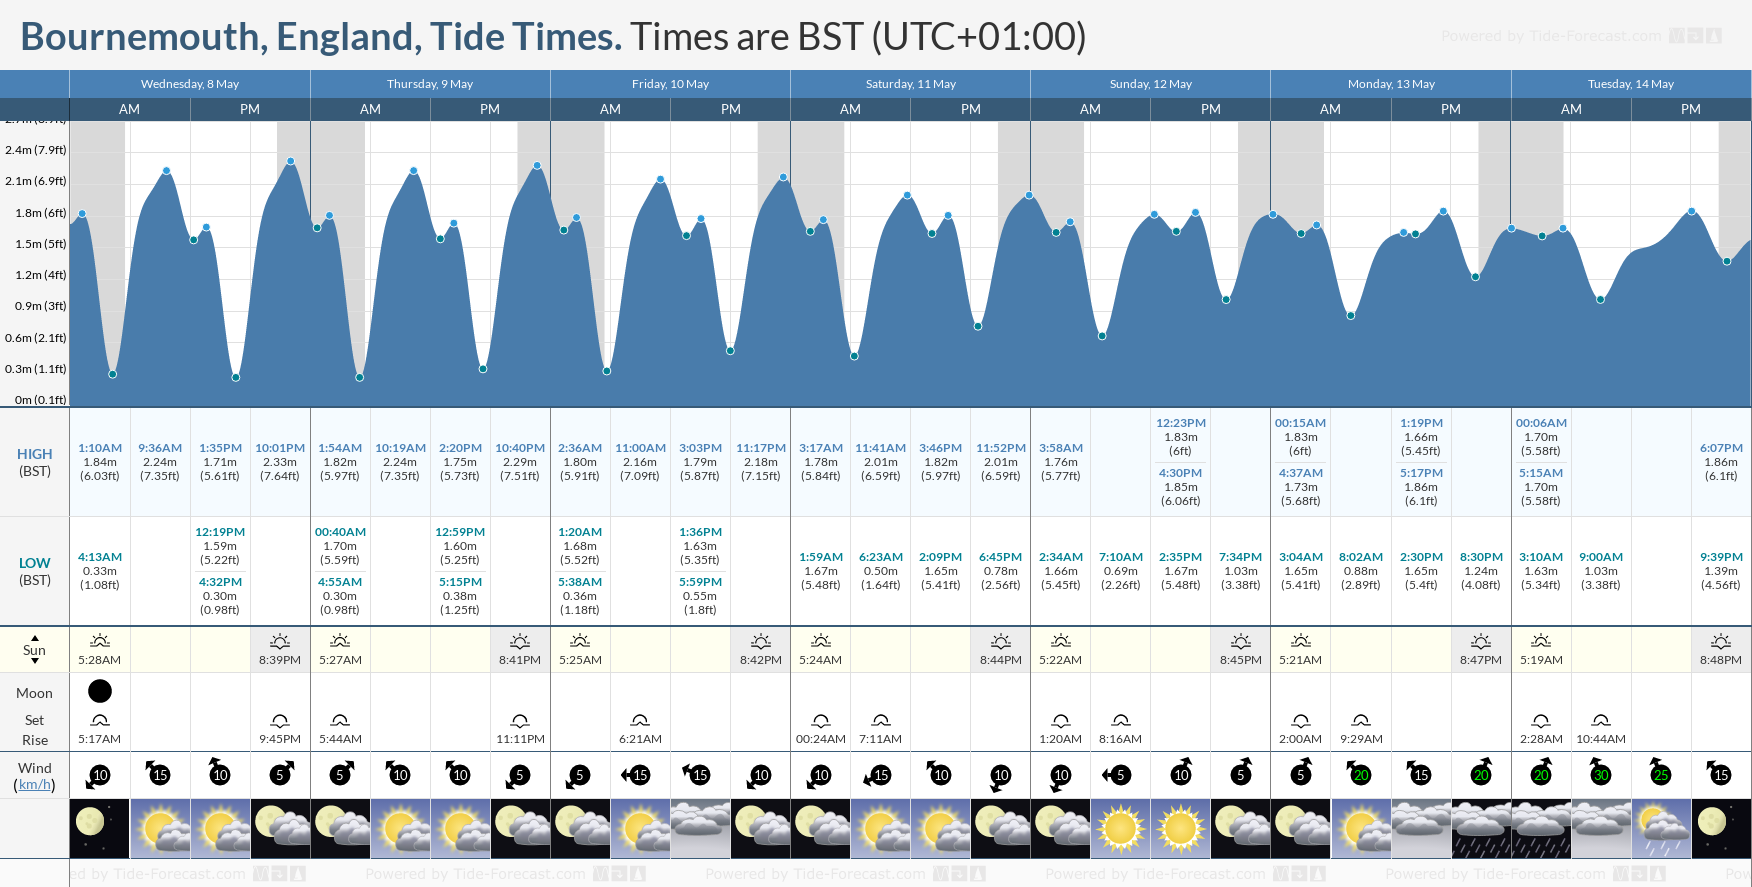 Bournemouth, England Tide Chart including high and low tide tide times for the next 7 days